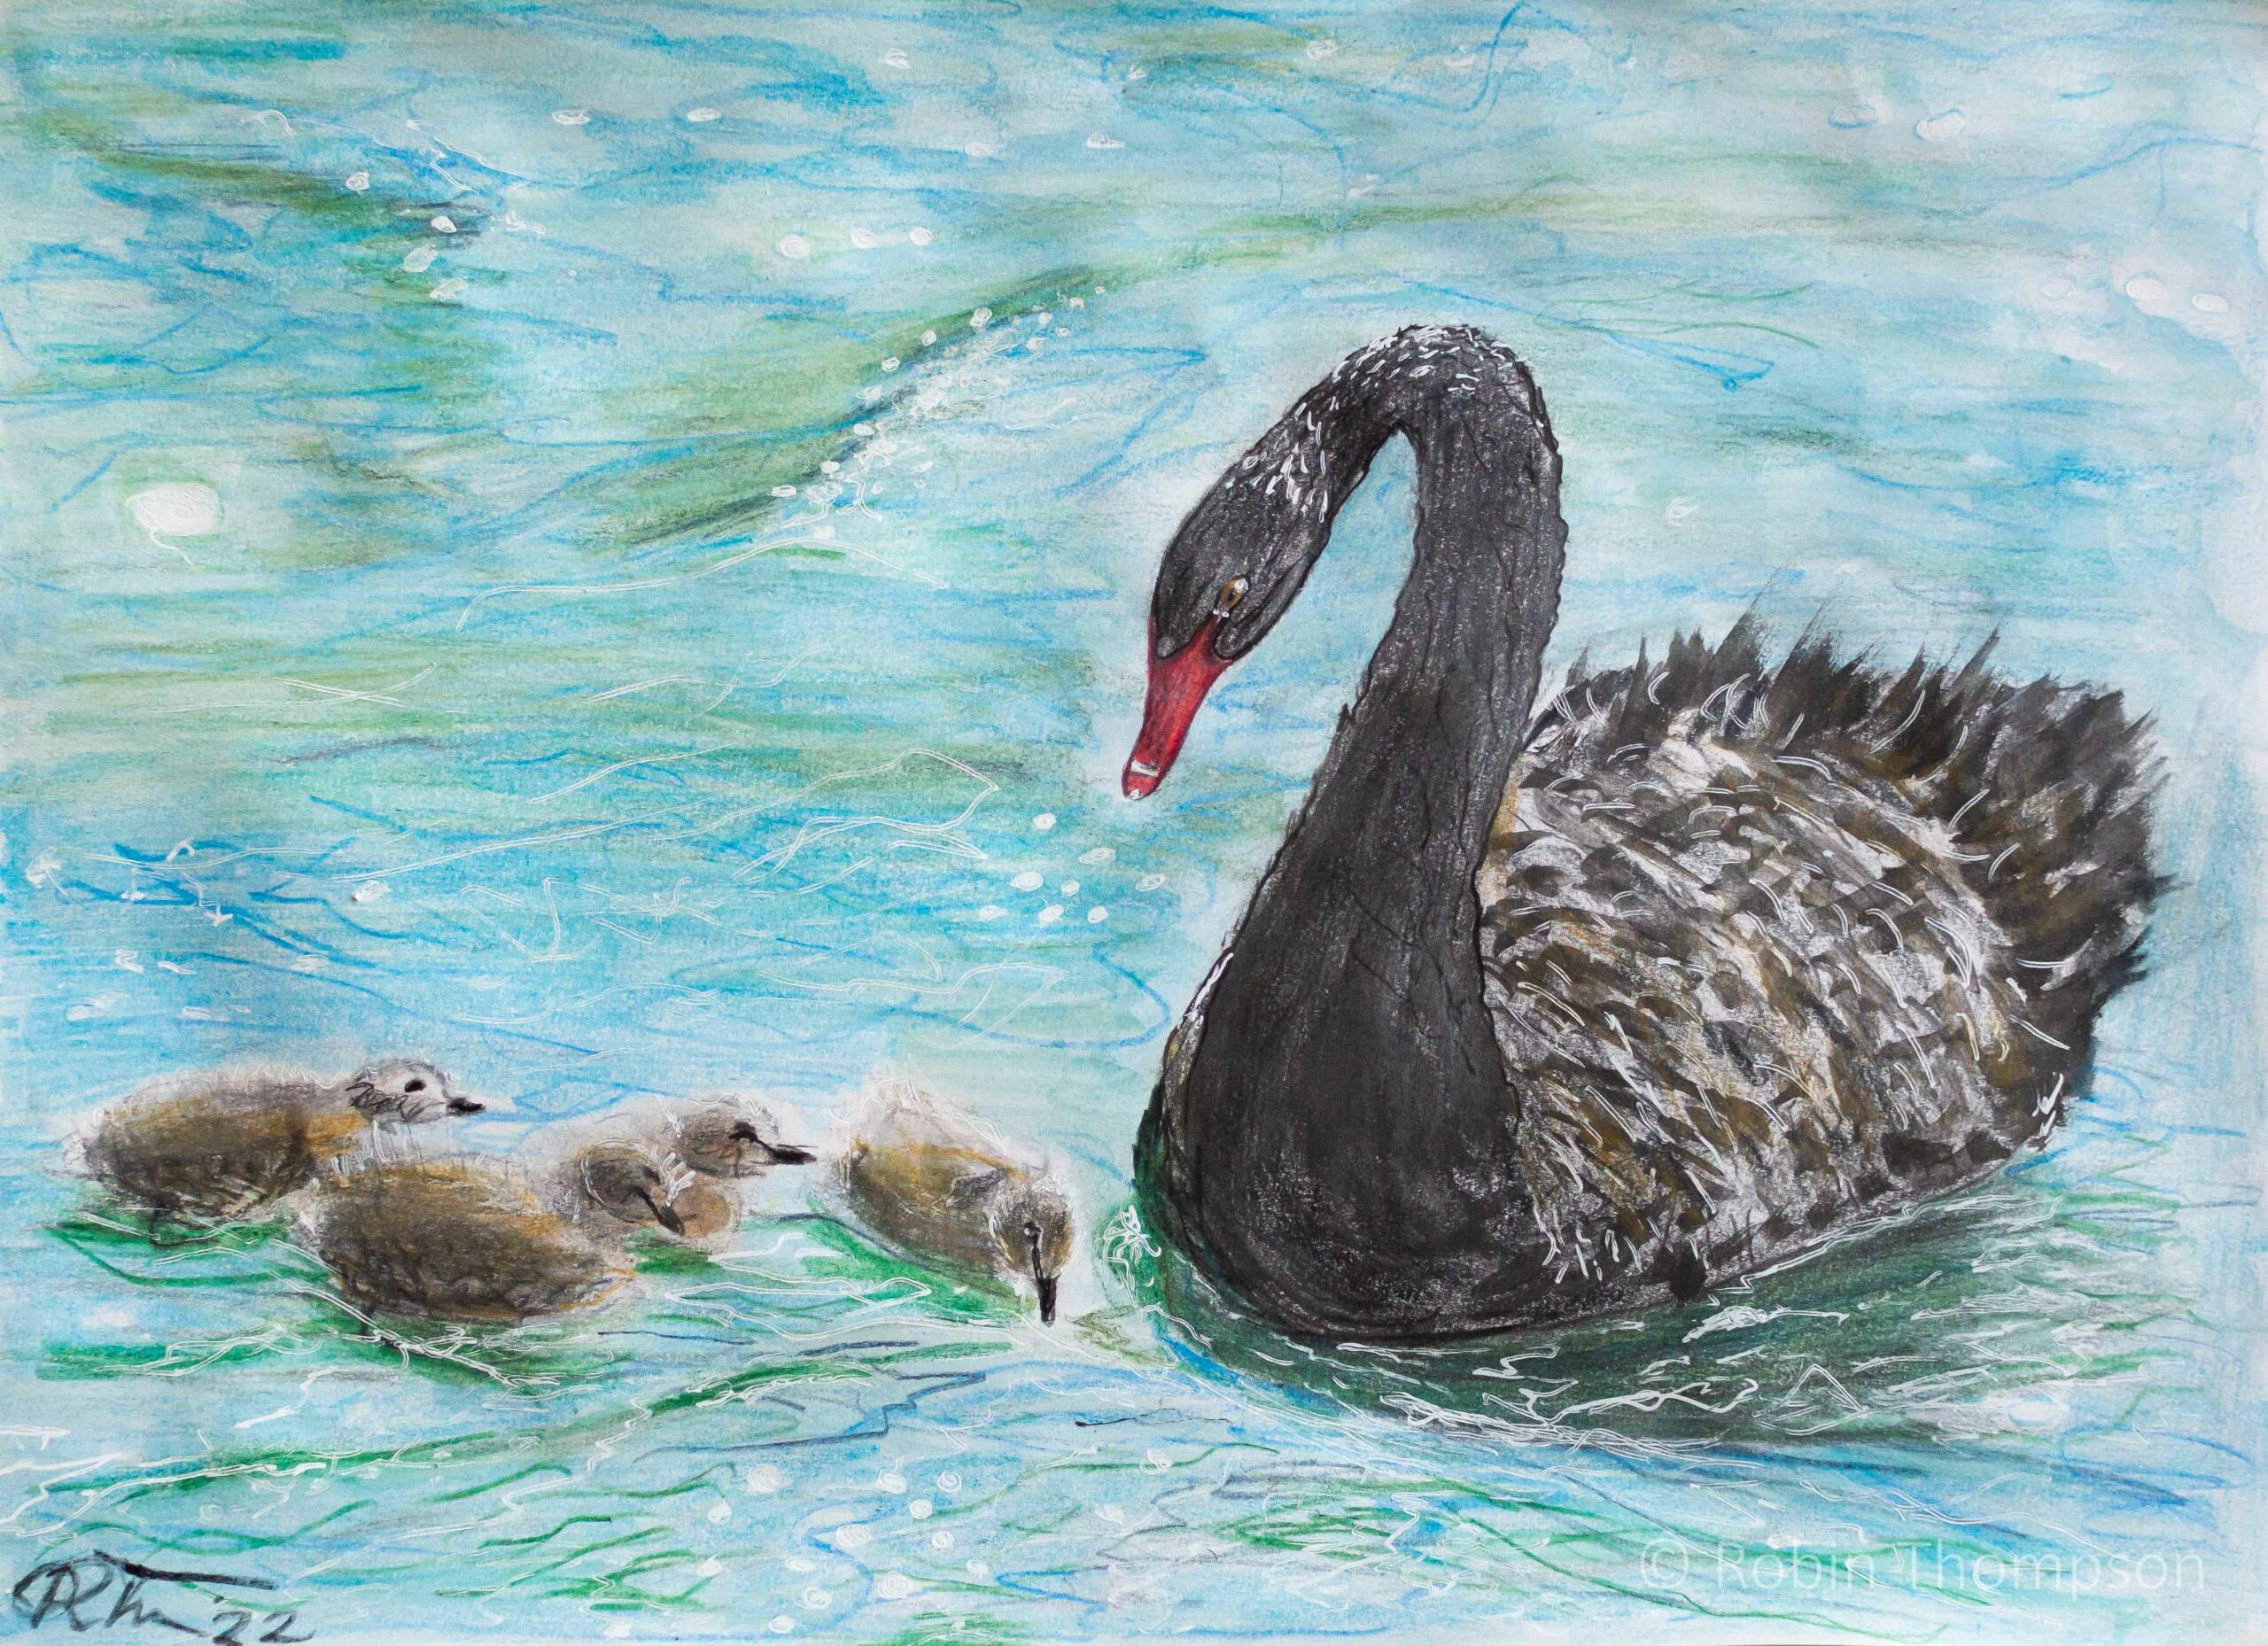 Watercolour and pencil drawing of a black swan swimming with their young swanlings (cygnets). The water appears cool and blue, with some hints of green. The cygnets appear soft and youthful.